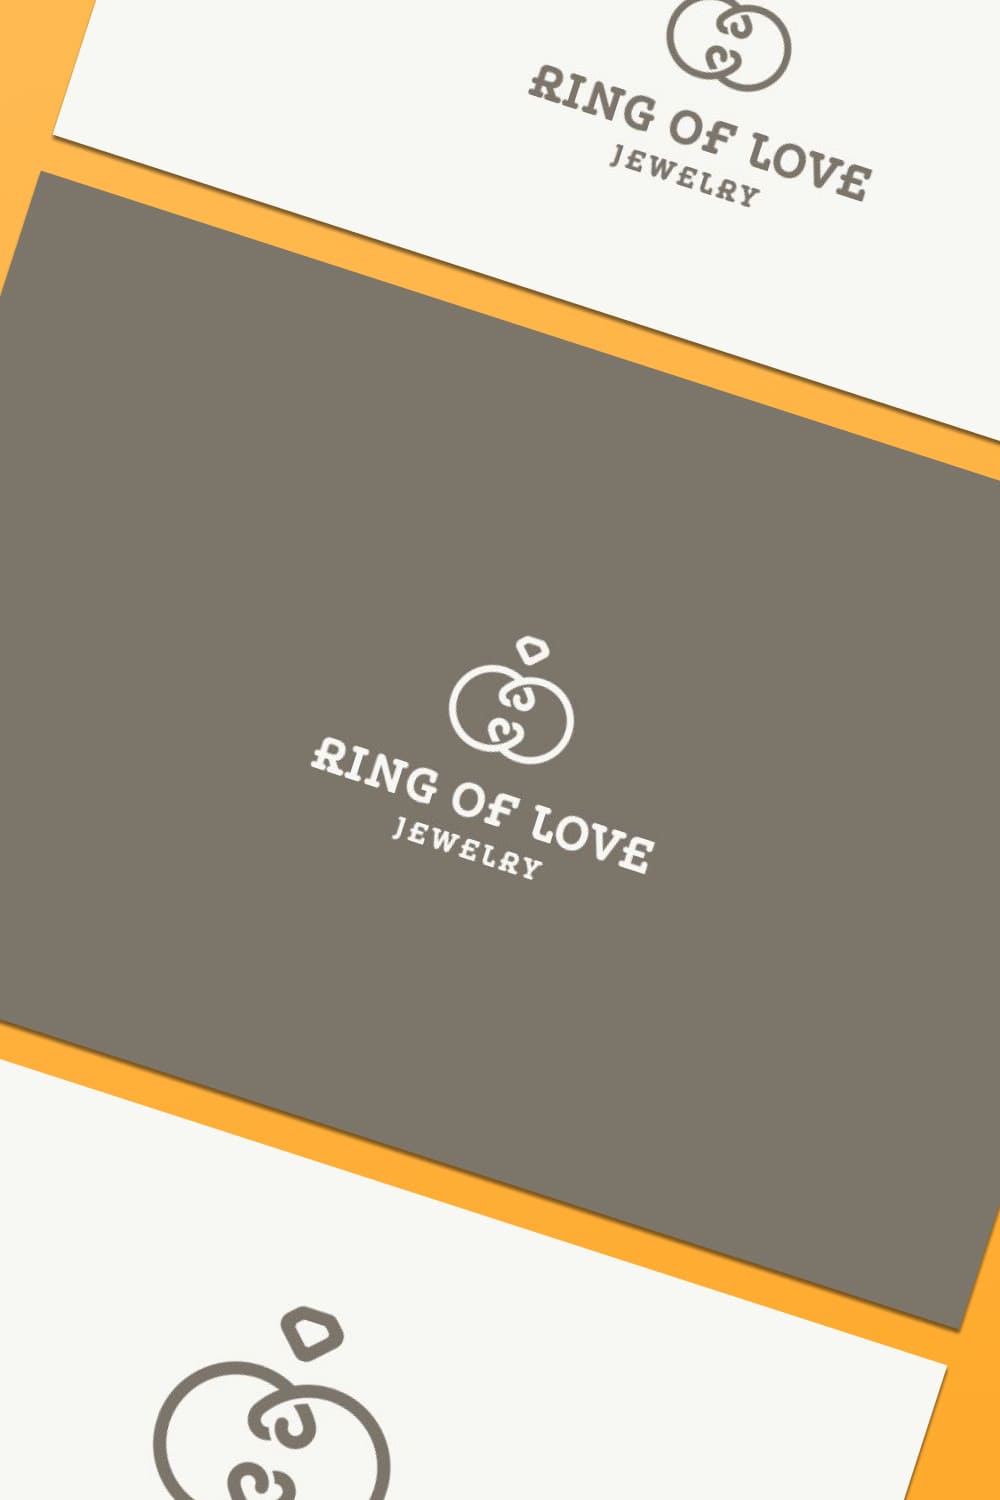 ring of love jewelry logo design template.